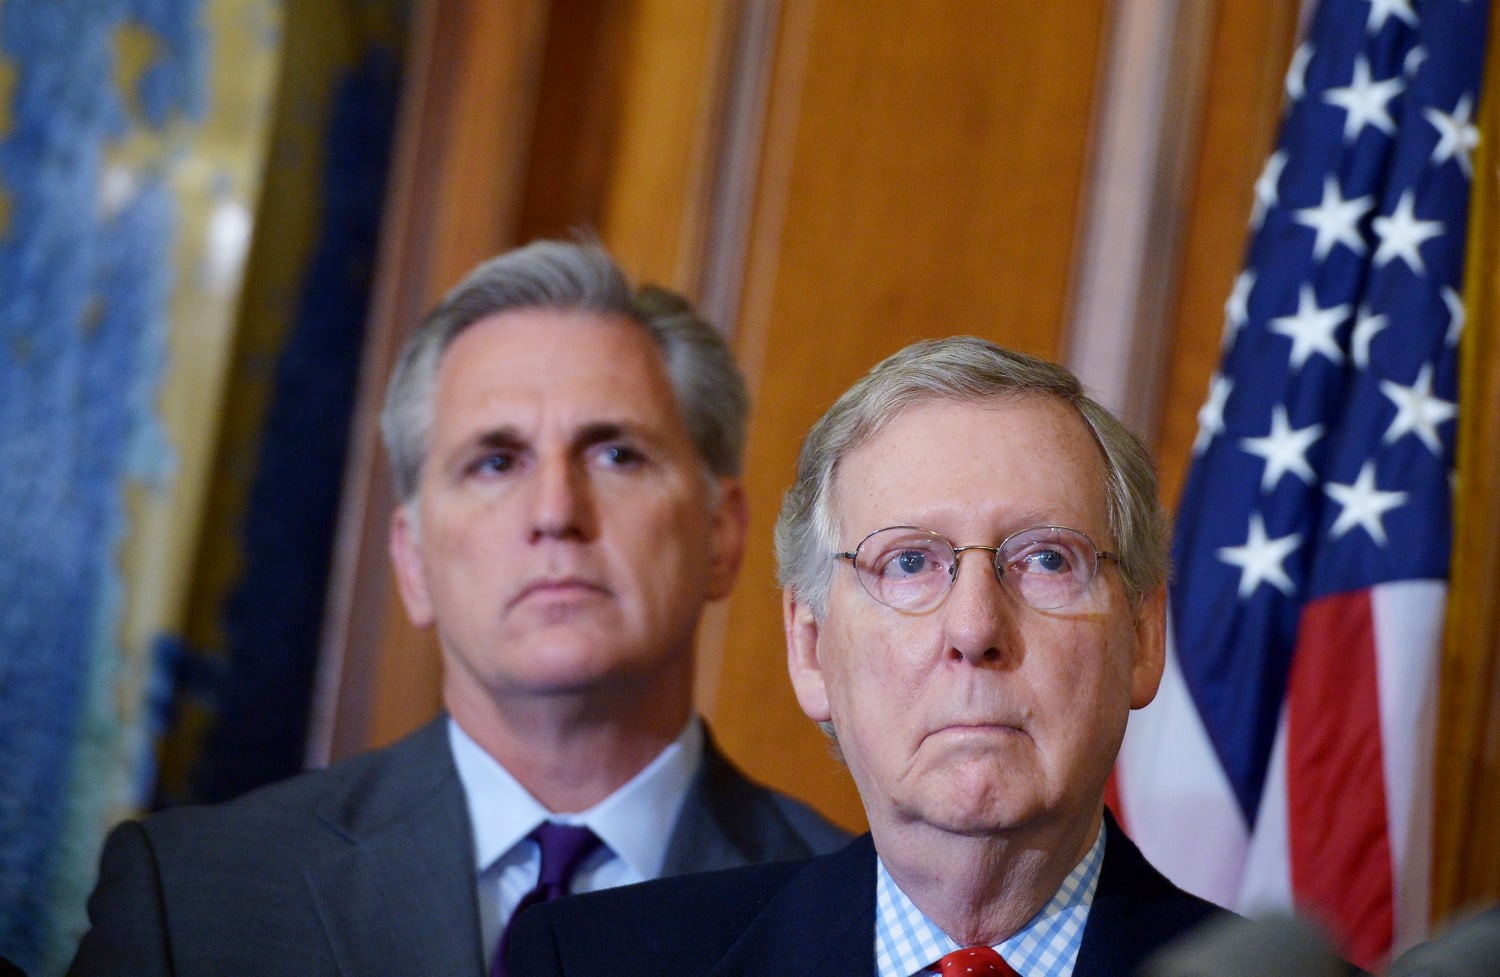 McCarthy, McConnell find they’re not on the same page (again)